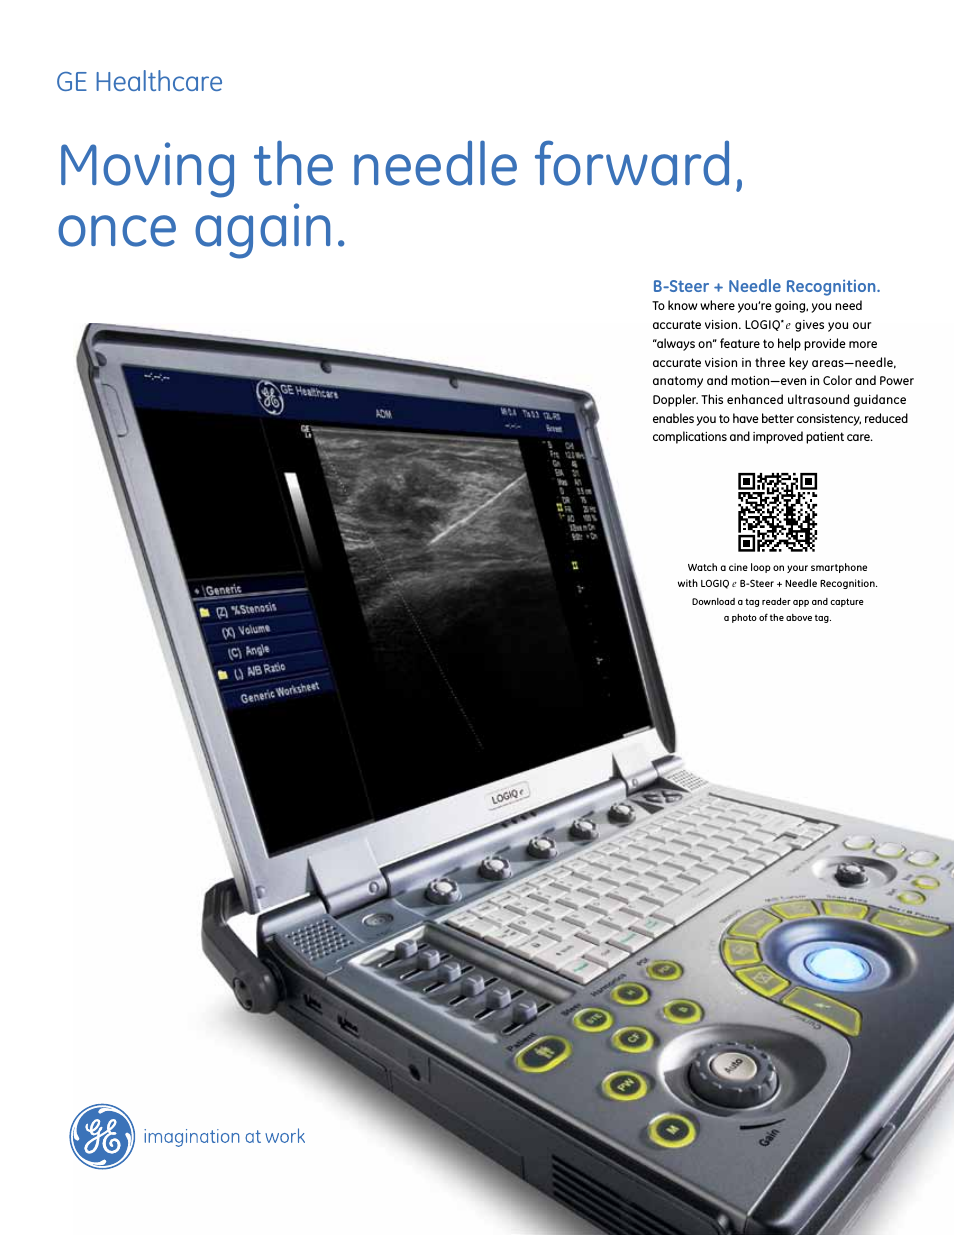 LOGIQ e B-Steer + Needle Recognition Accuracy redefined